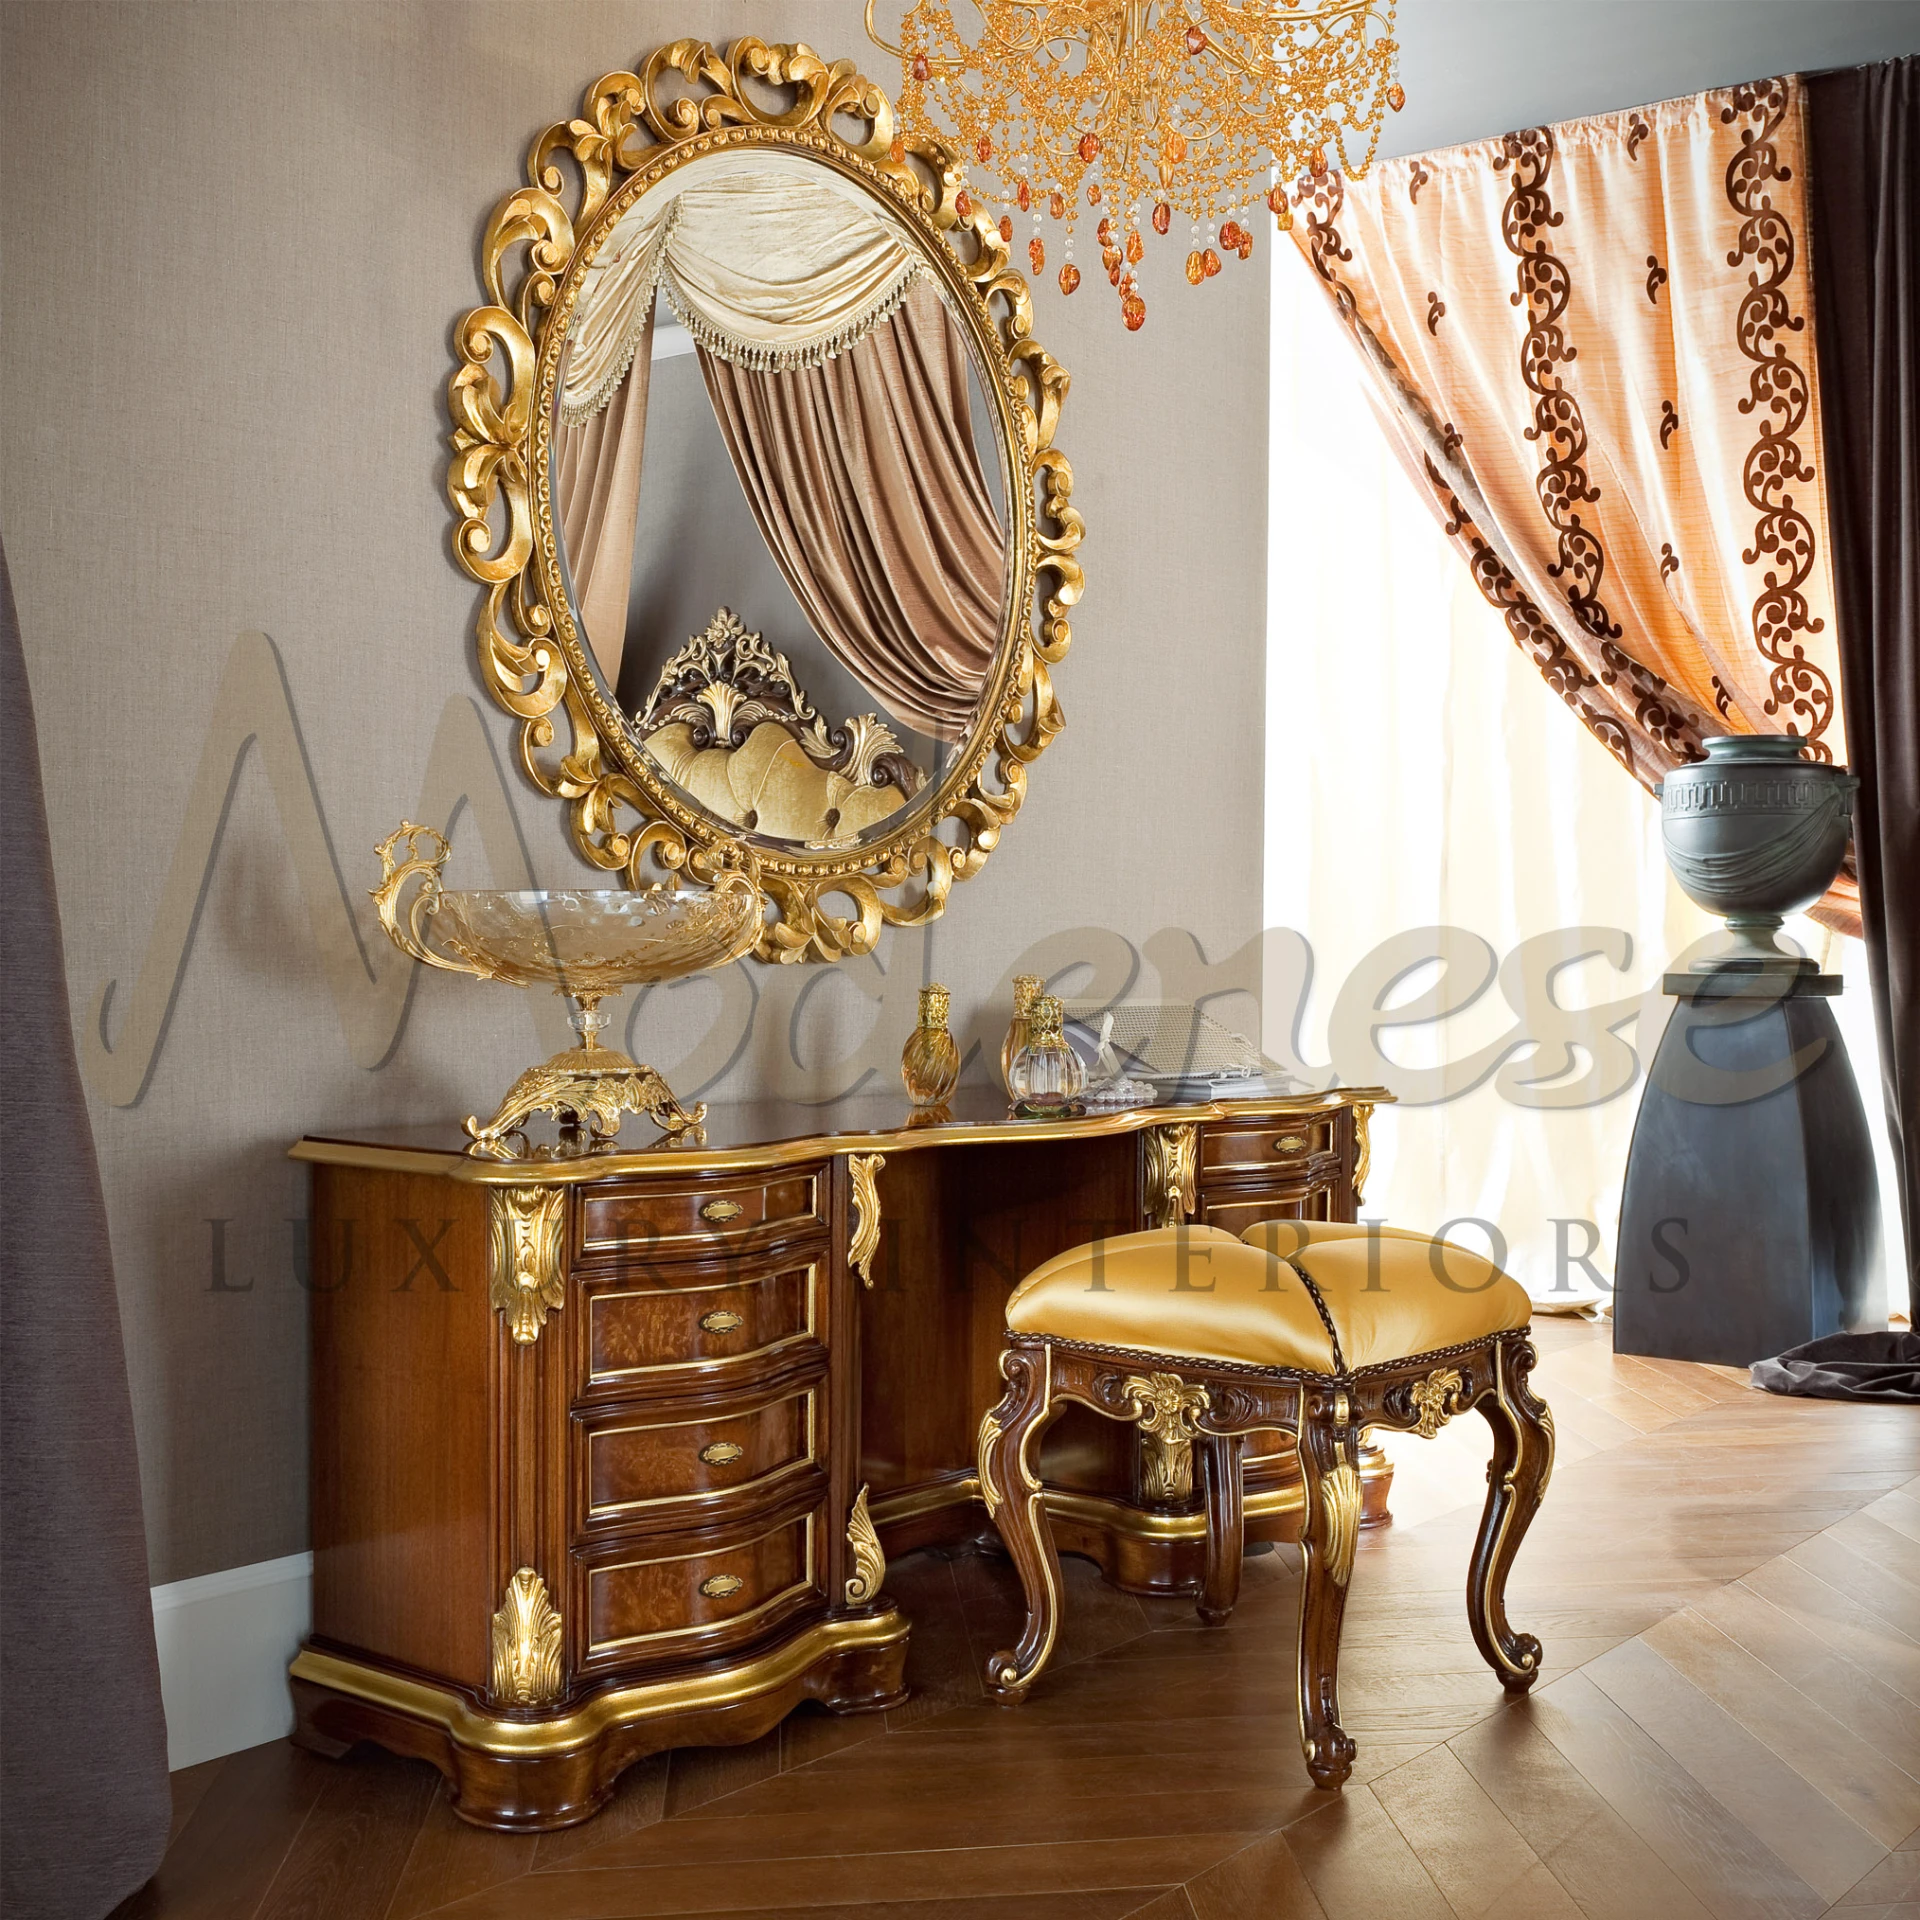 Elegant wooden chest of drawers with gold trimmings and decorative bowl.